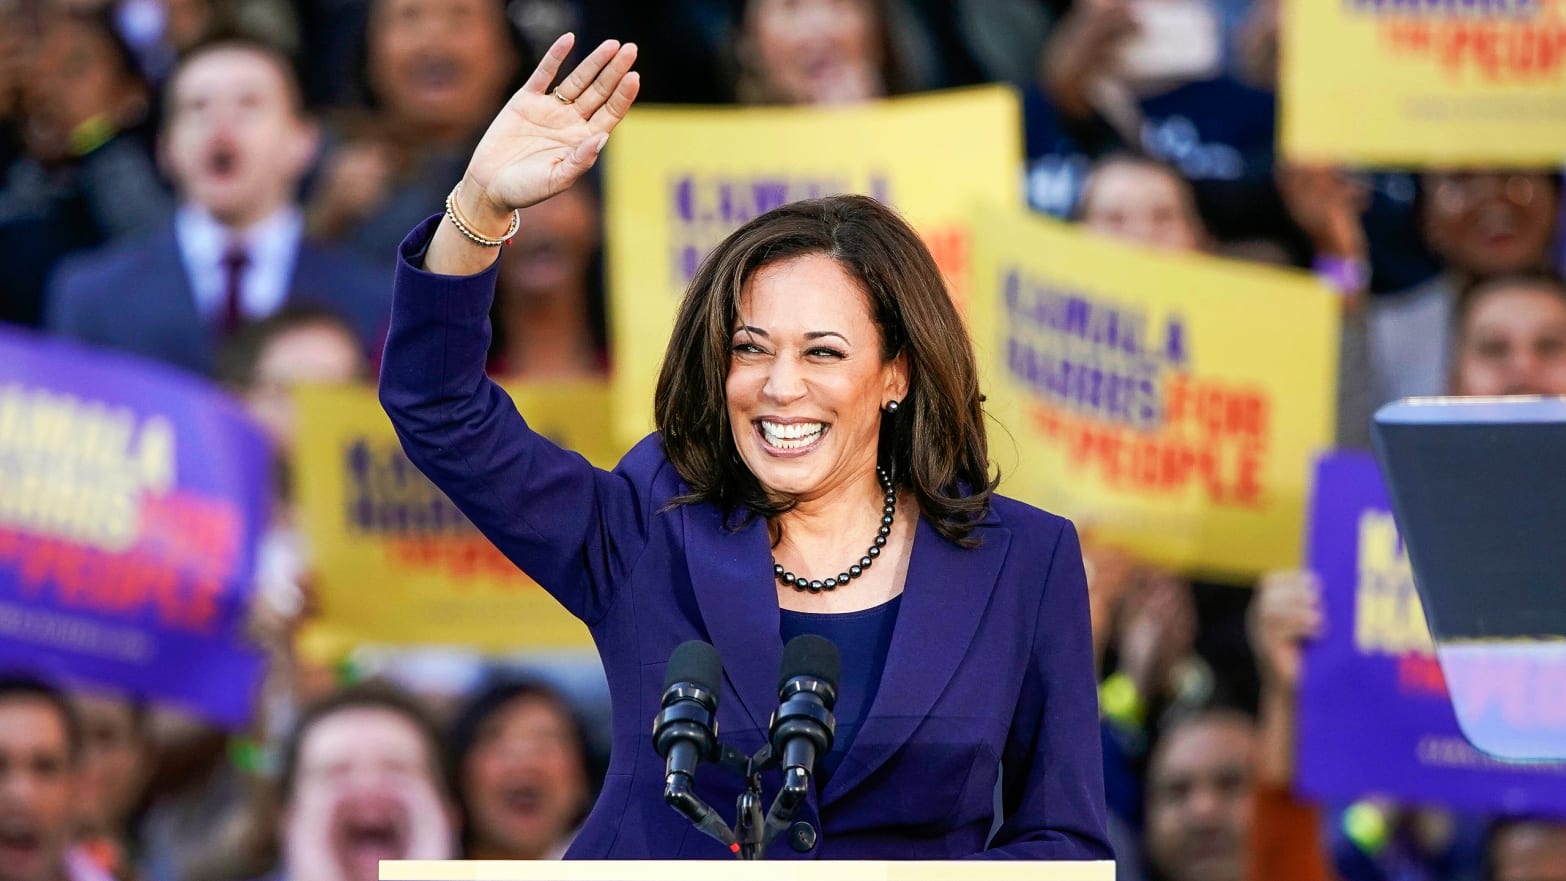 Kamala Harris waves and smiles to a crowd holding up supportive campaign posters